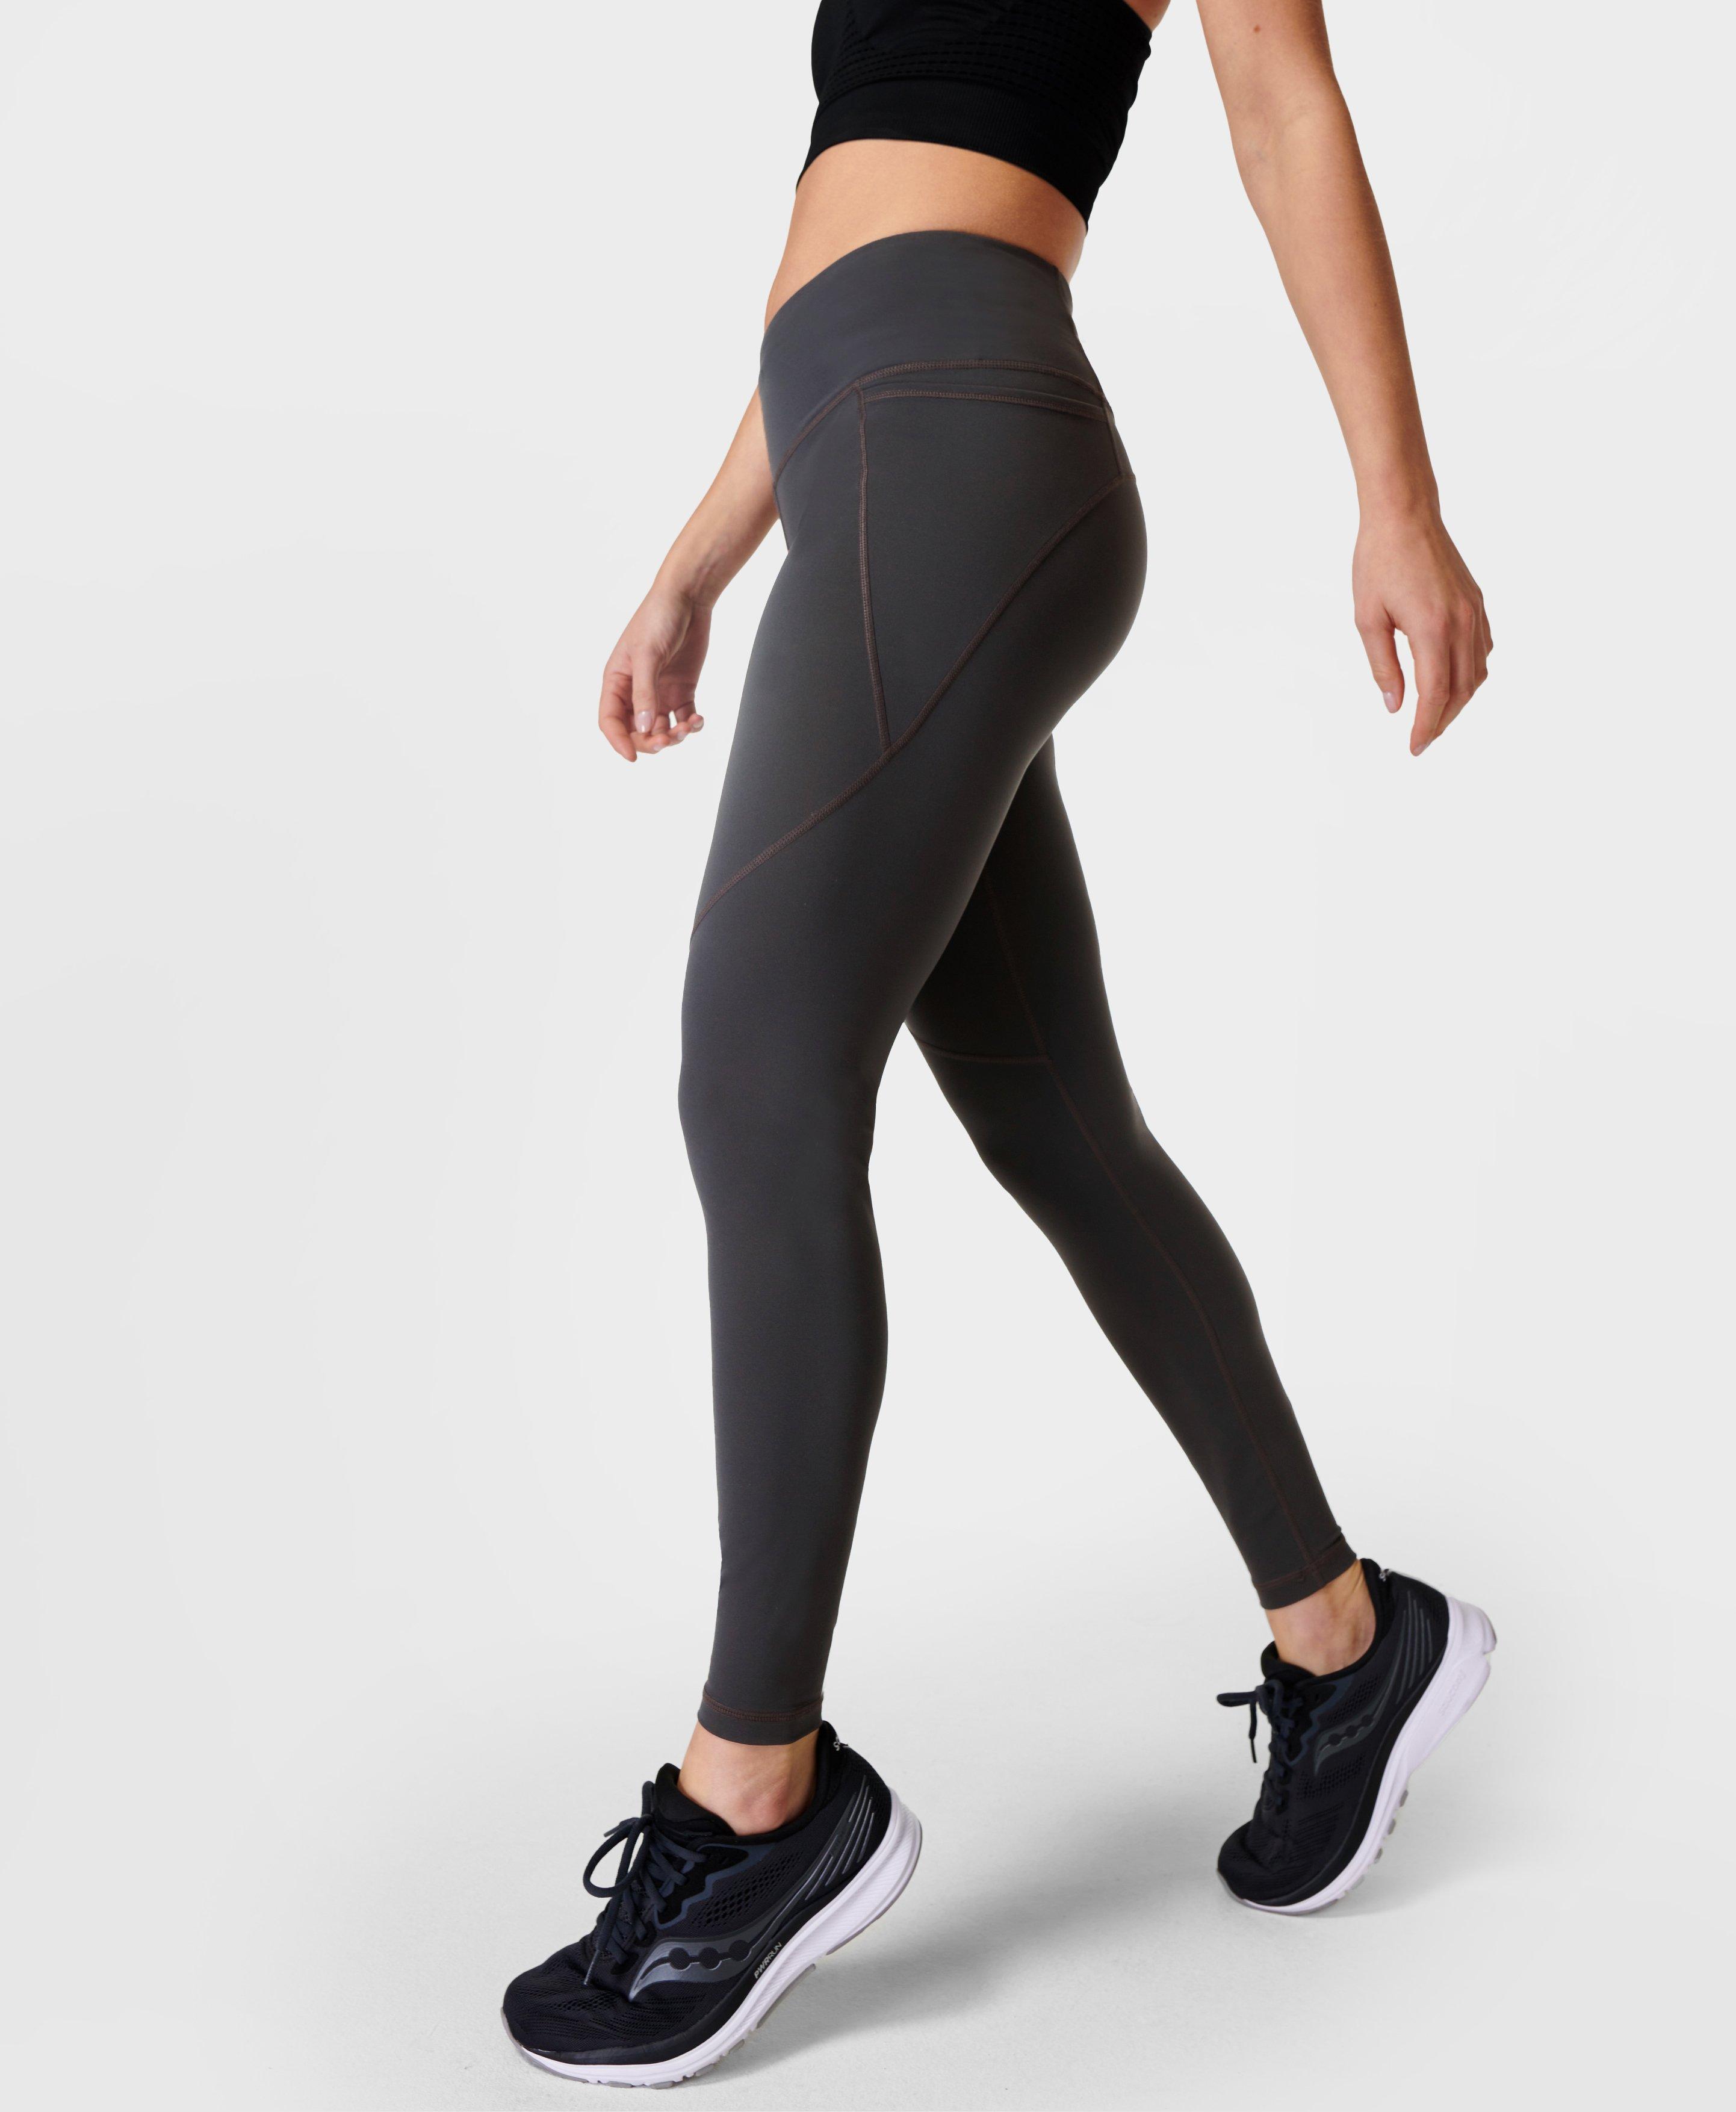 Sport Band Leggings - Double Weight Butter Stone - Final Sale